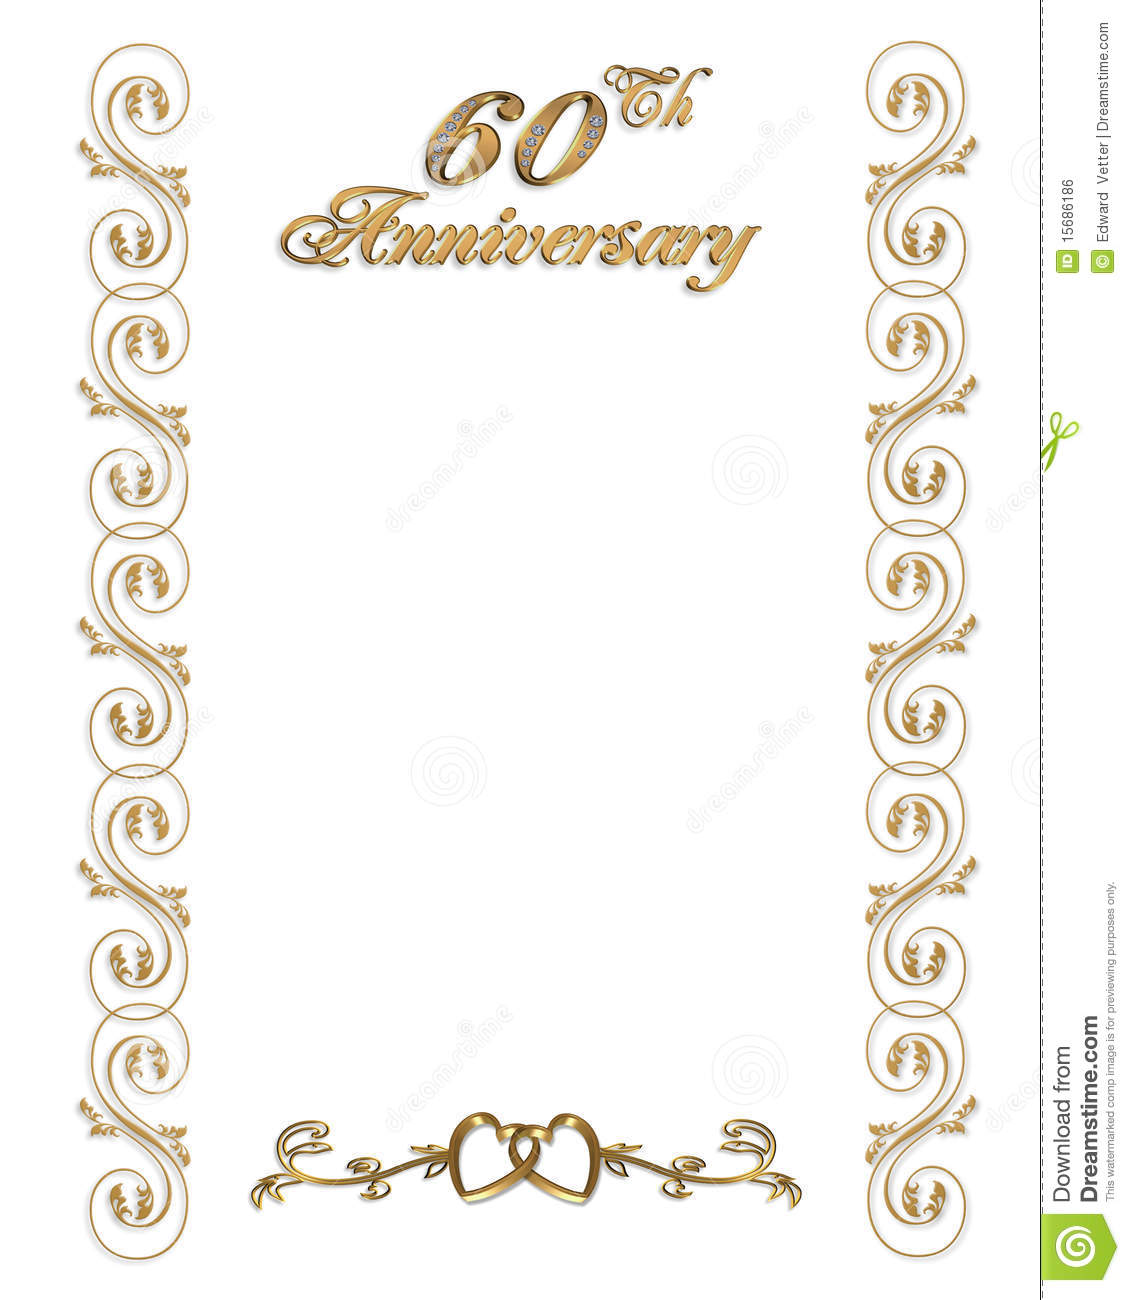 60th-birthday-clip-art-borders-20-free-cliparts-download-images-on